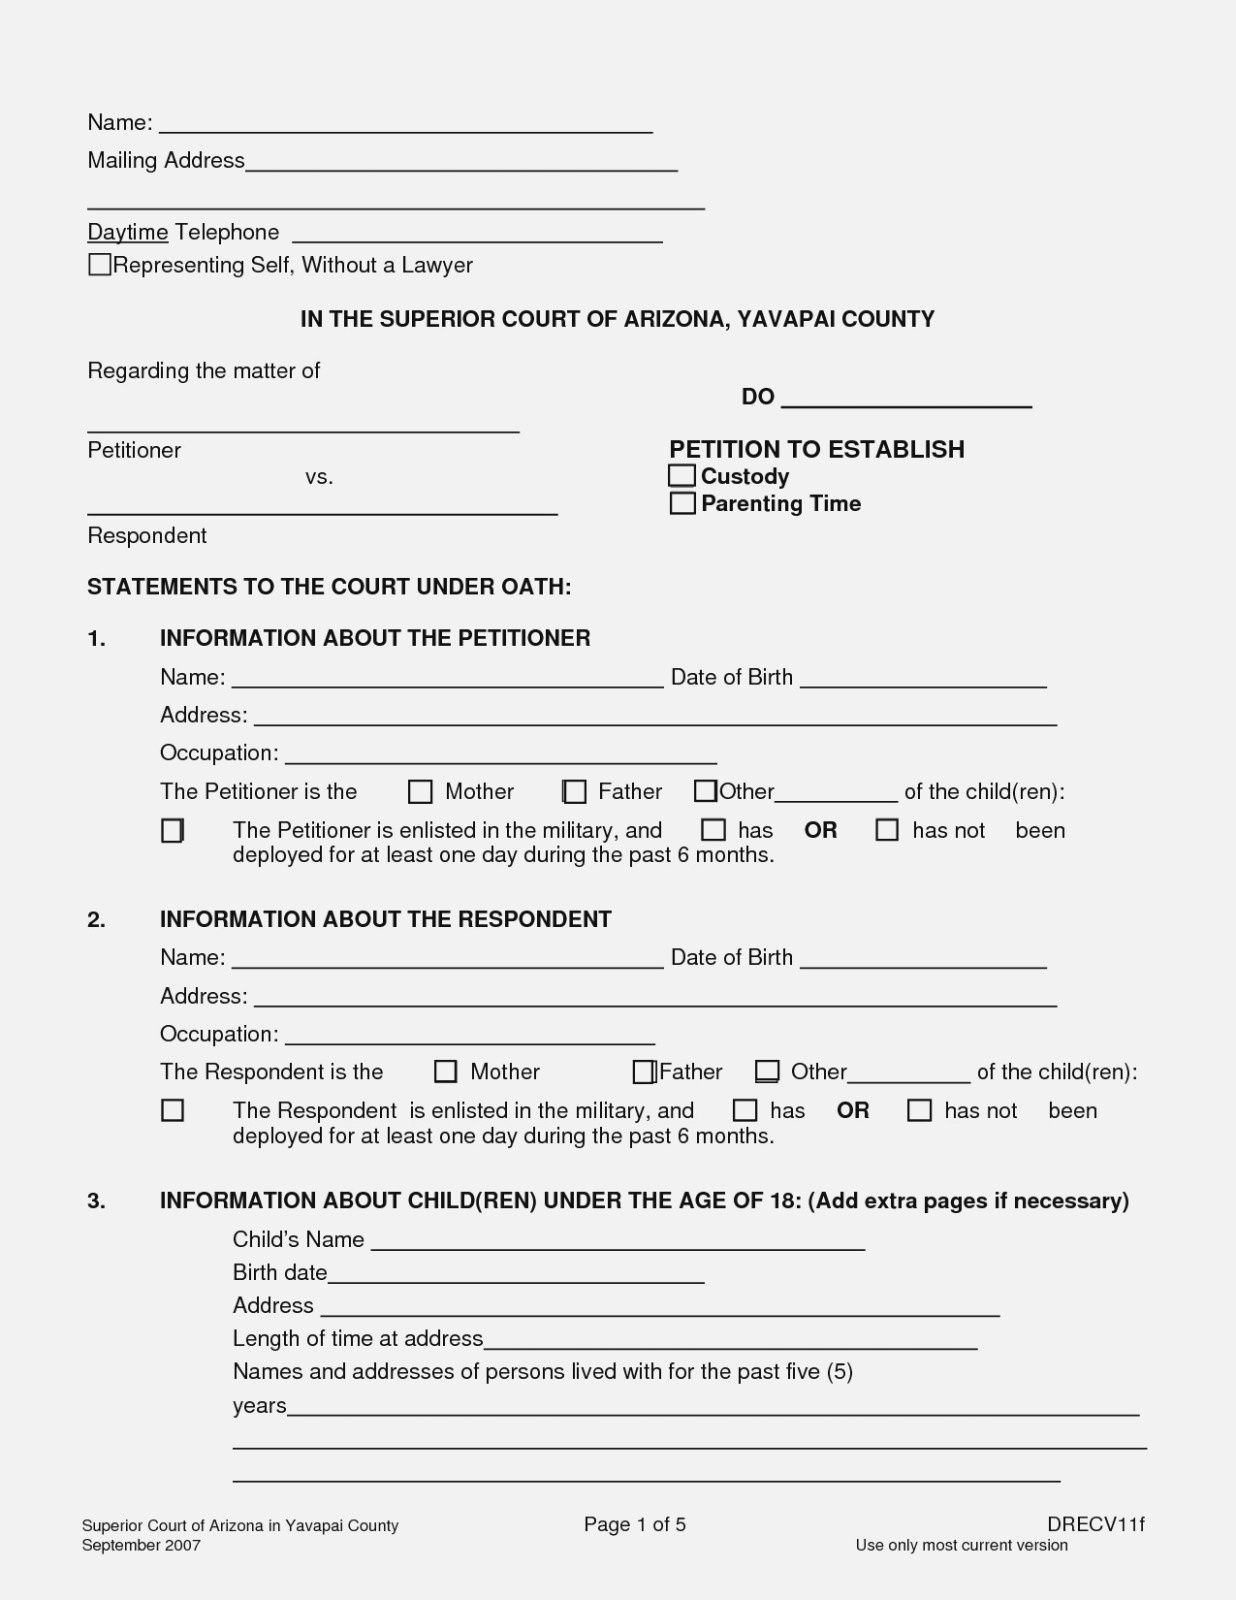 Is Free Printable | Realty Executives Mi : Invoice And Resume - Free Printable Guardianship Forms Texas